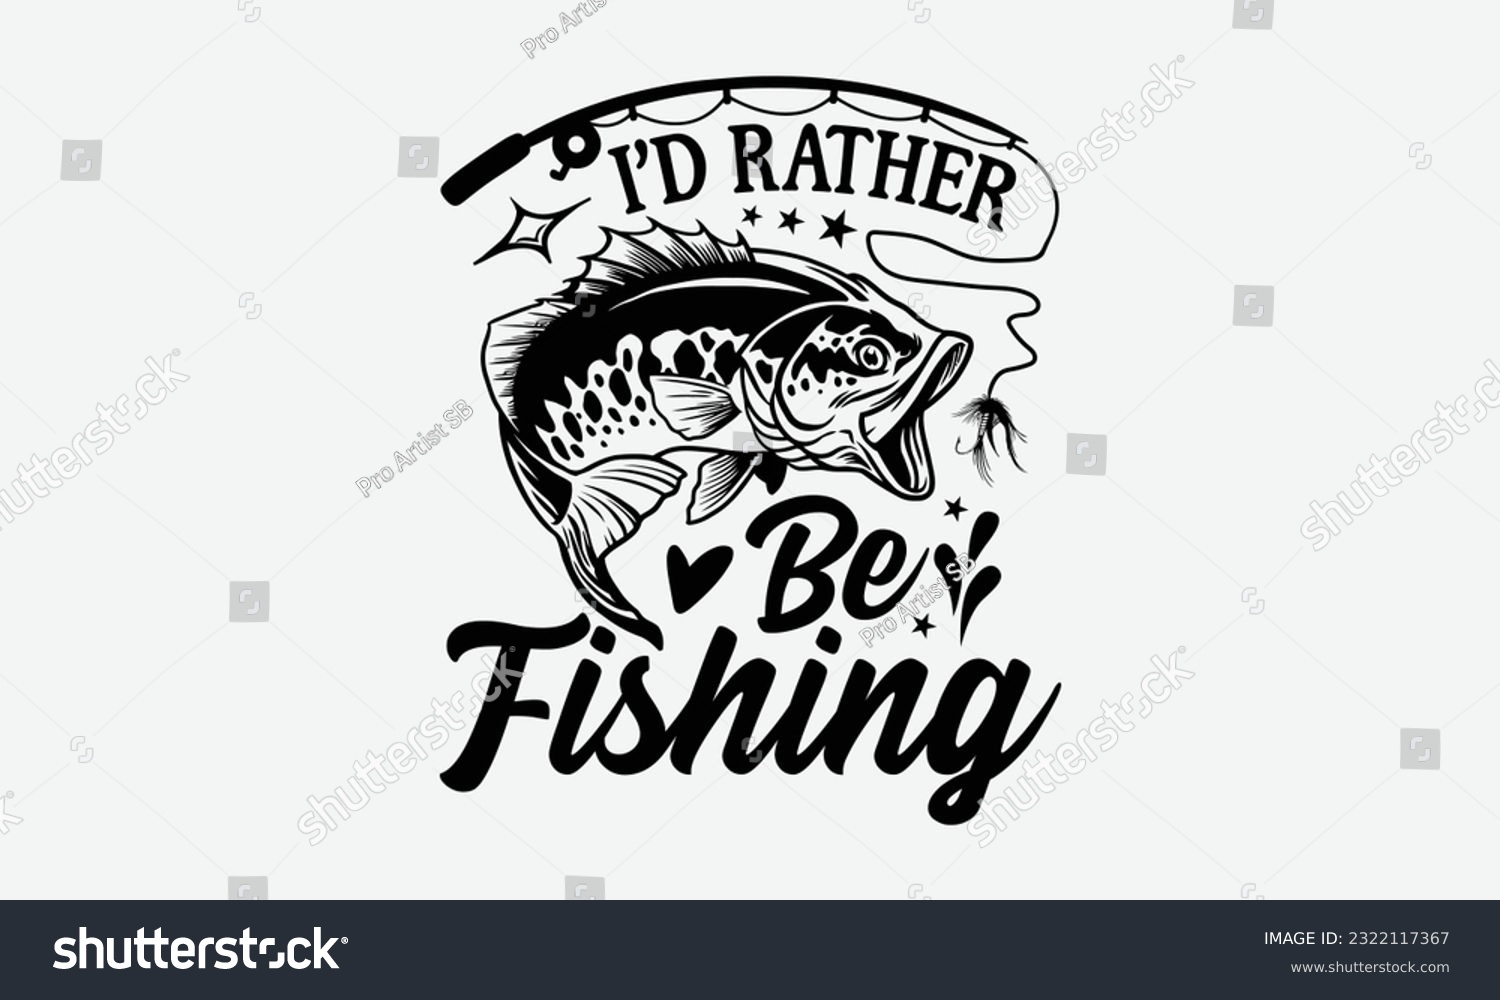 SVG of I’d Rather Be Fishing - Fishing SVG Design, Isolated On White Background, For Cutting Machine, Silhouette Cameo, Cricut. svg